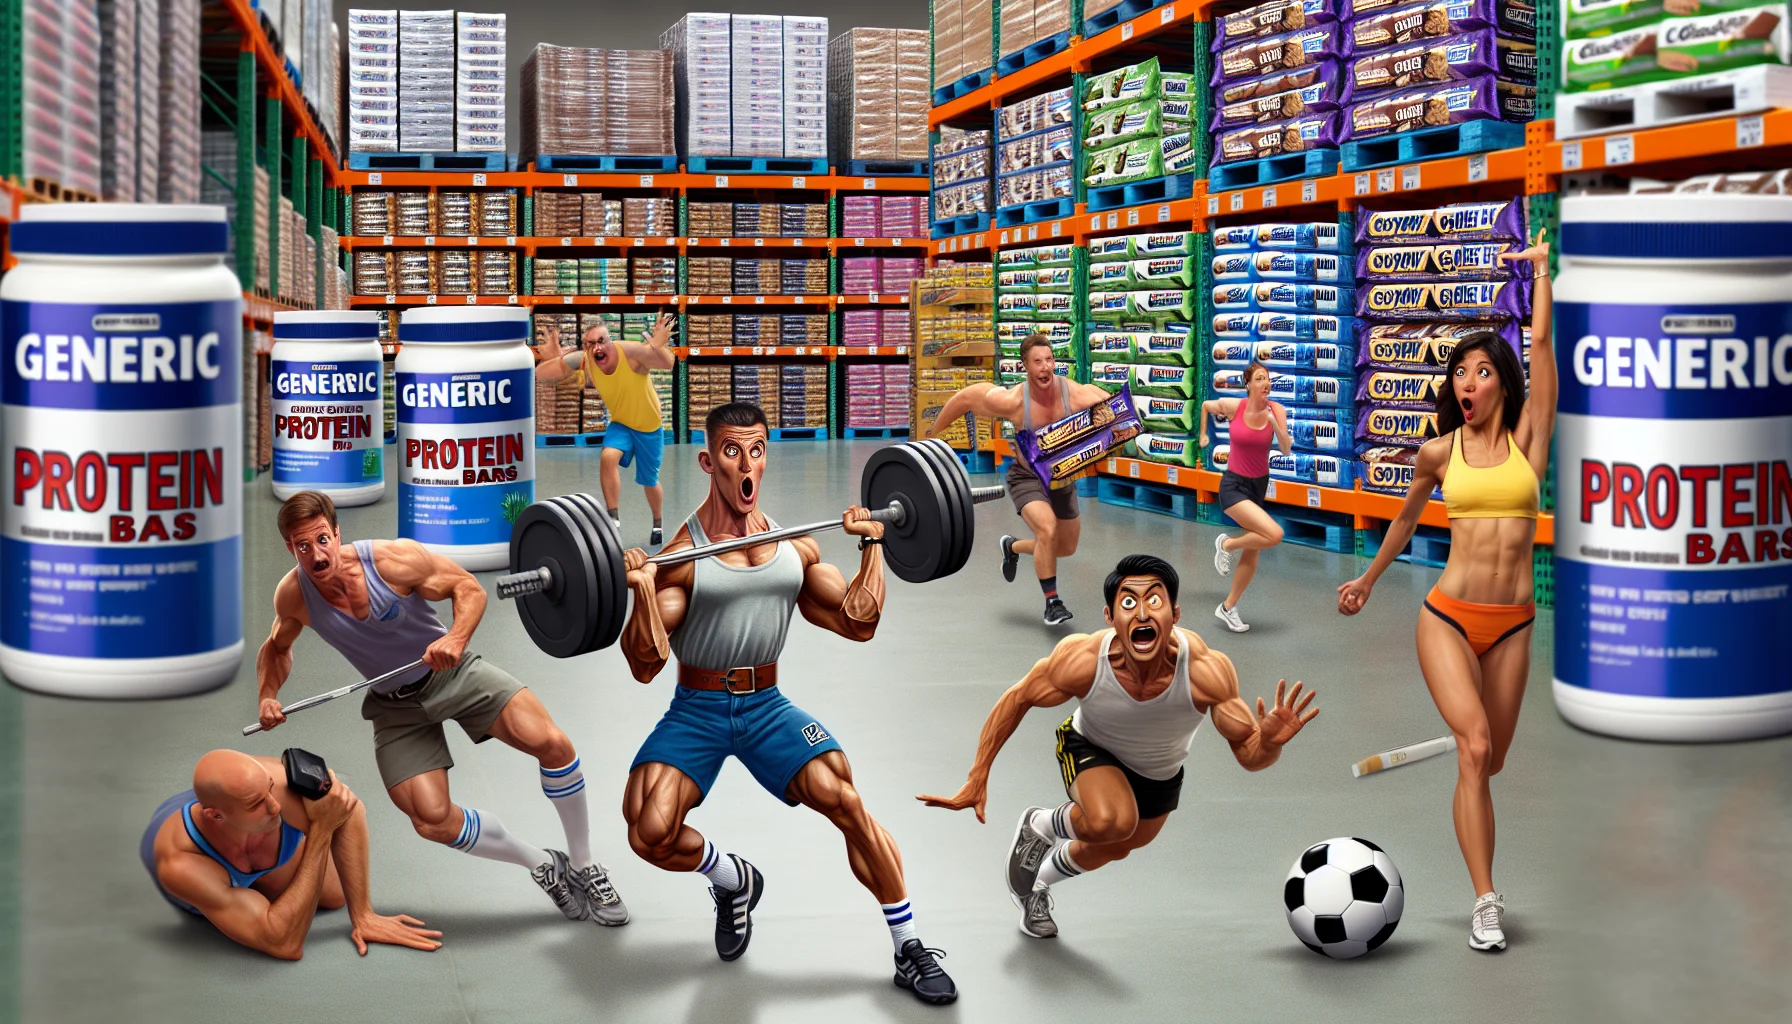 Create an image that showcases an array of generic protein bars on a warehouse store shelf, akin to the ones seen at Costco. Add a backdrop depicting a comedic scene involving different people engaged in various sports activities. Include a male weightlifter of Caucasian descent, misjudging his strength and lifting feather-light objects, a female Hispanic marathon runner sprinting at lightning speed leaving behind a trail of protein bars, and a surprised South Asian soccer player, discovering a protein bar instead of a soccer ball. The image should subtly promote the benefits of sports supplements in a friendly, humorous way.